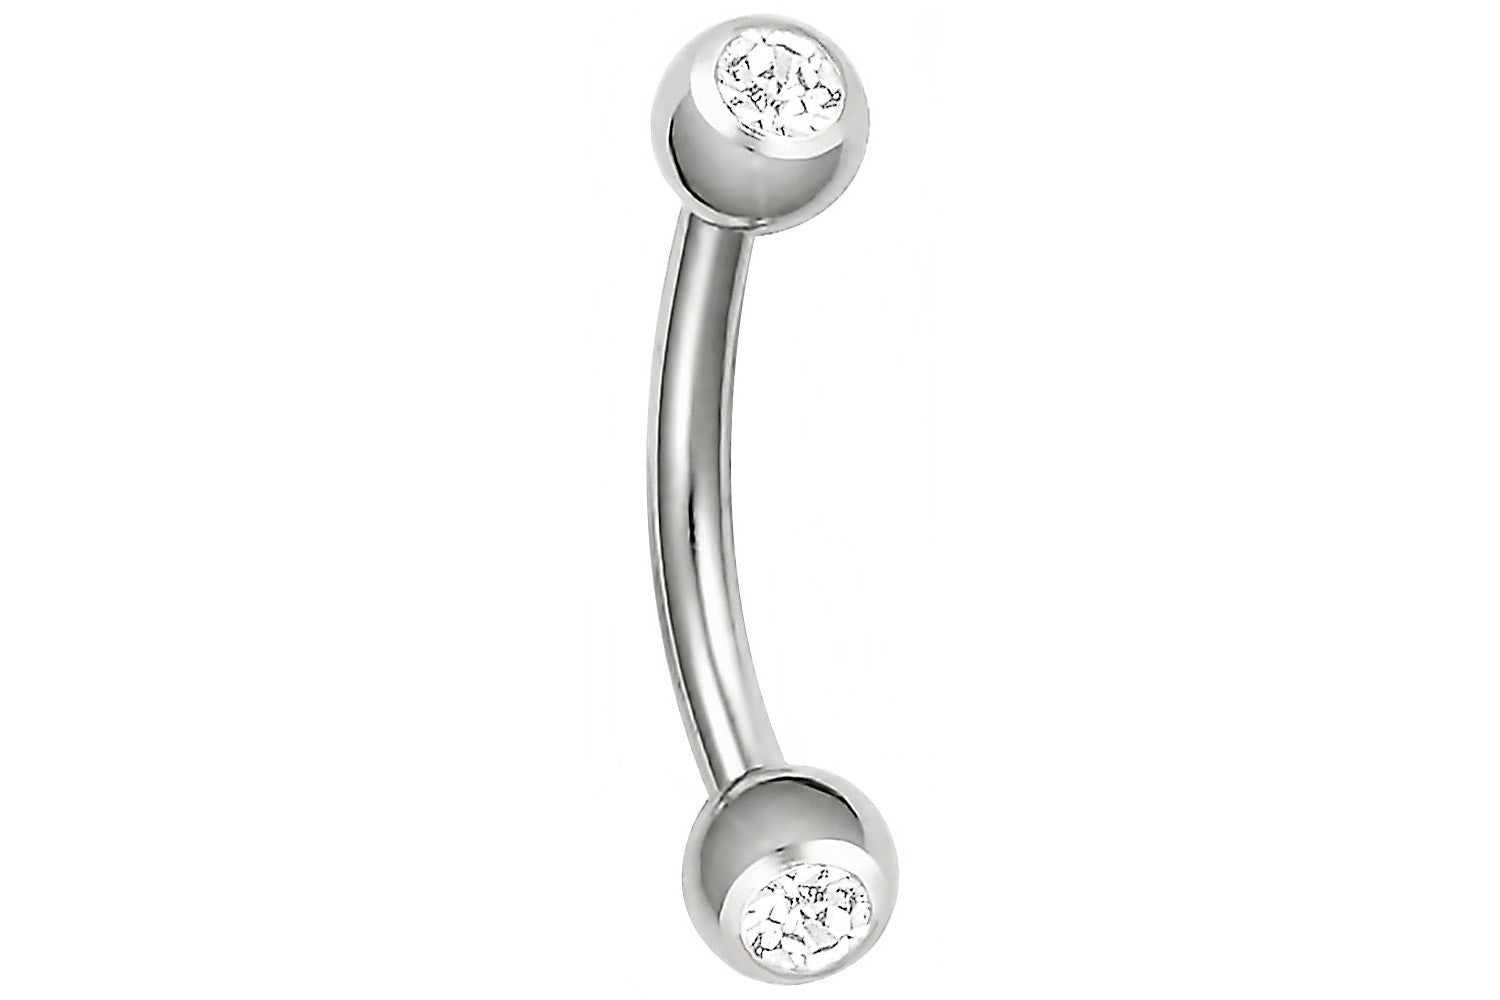 This 16 gauge eyebrow ring is made with surgical grade 316L Stainless Steel. This eyebrow jewelry is hypoallergenic and features press fit (not glued) Cubic Zirconia crystals. This curved barbell is 5/16" (8 mm) long with 3 mm balls. Both end balls unscrew for easy use. This body jewelry is hypoallergenic and nickel free.